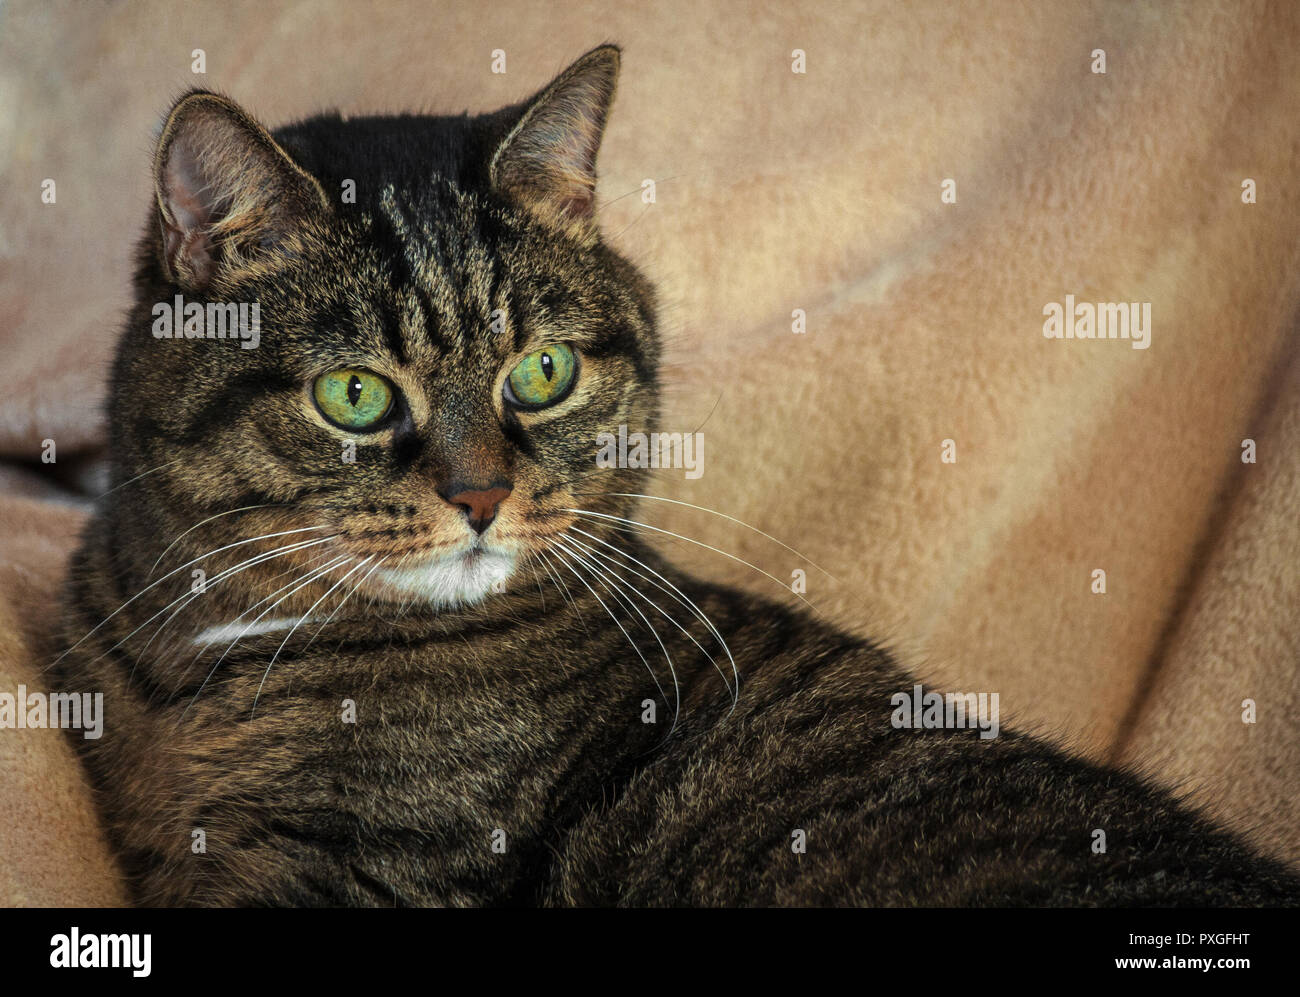 an adult mongrel female cat, huge green eyes and a striped color, brown shades with black, lying on a light beige rug, orange nose, small ears, Stock Photo